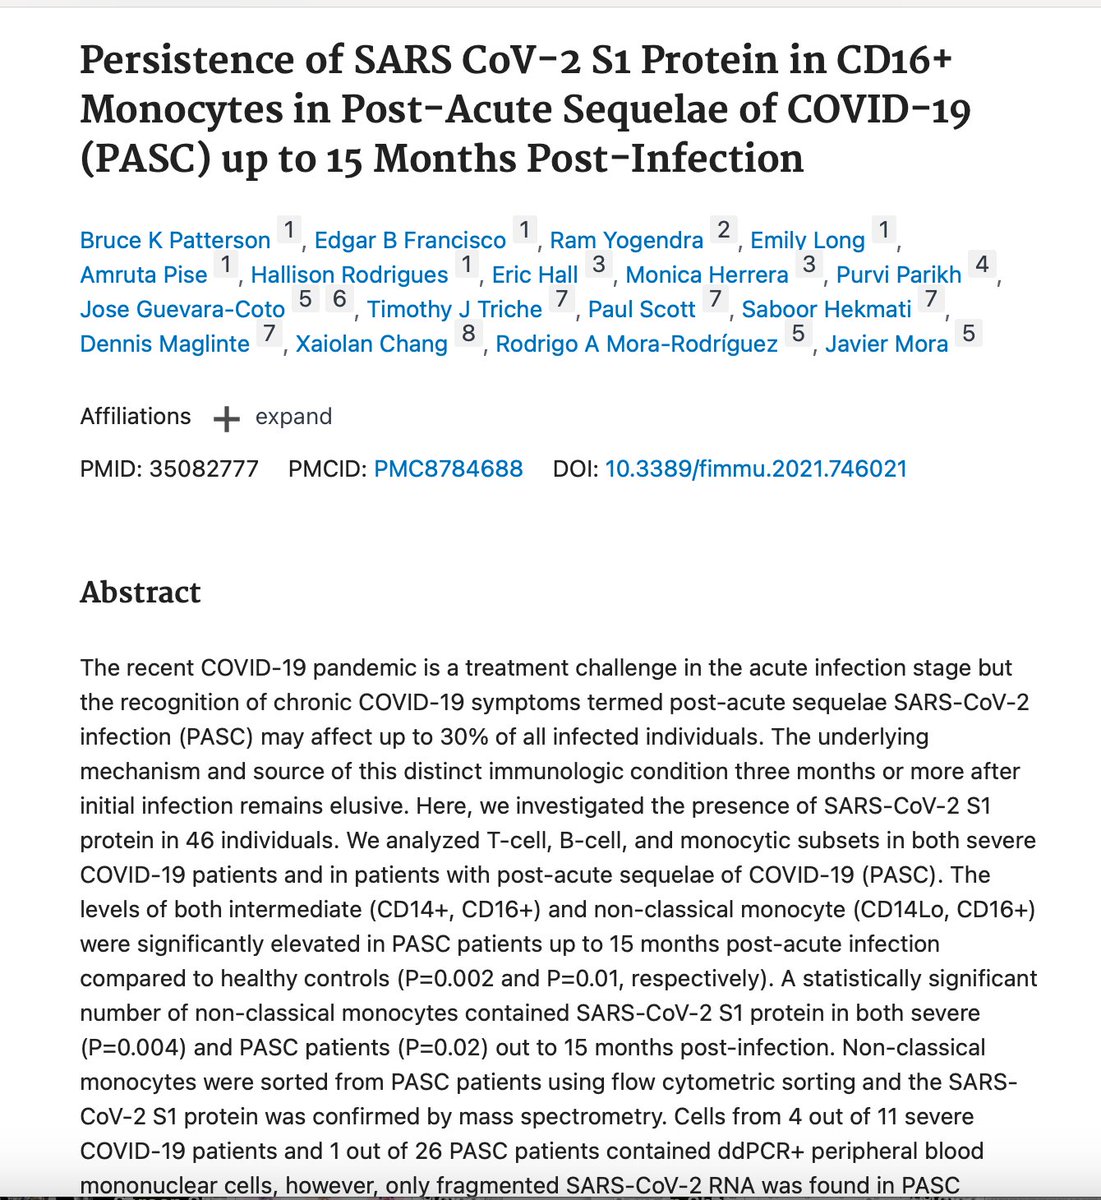 @Thomas1774Paine @newstart_2024 No, Long Covid, the persistence of the 🦠 in reservoirs or spike protein antigens in monocytes is real.
It causes micro clots, endotheliitis, neurodegeneration and immune dysregulation, like AIDS.
Long Vaxx/💉 injury mimics it because it too causes the spike protein to persist